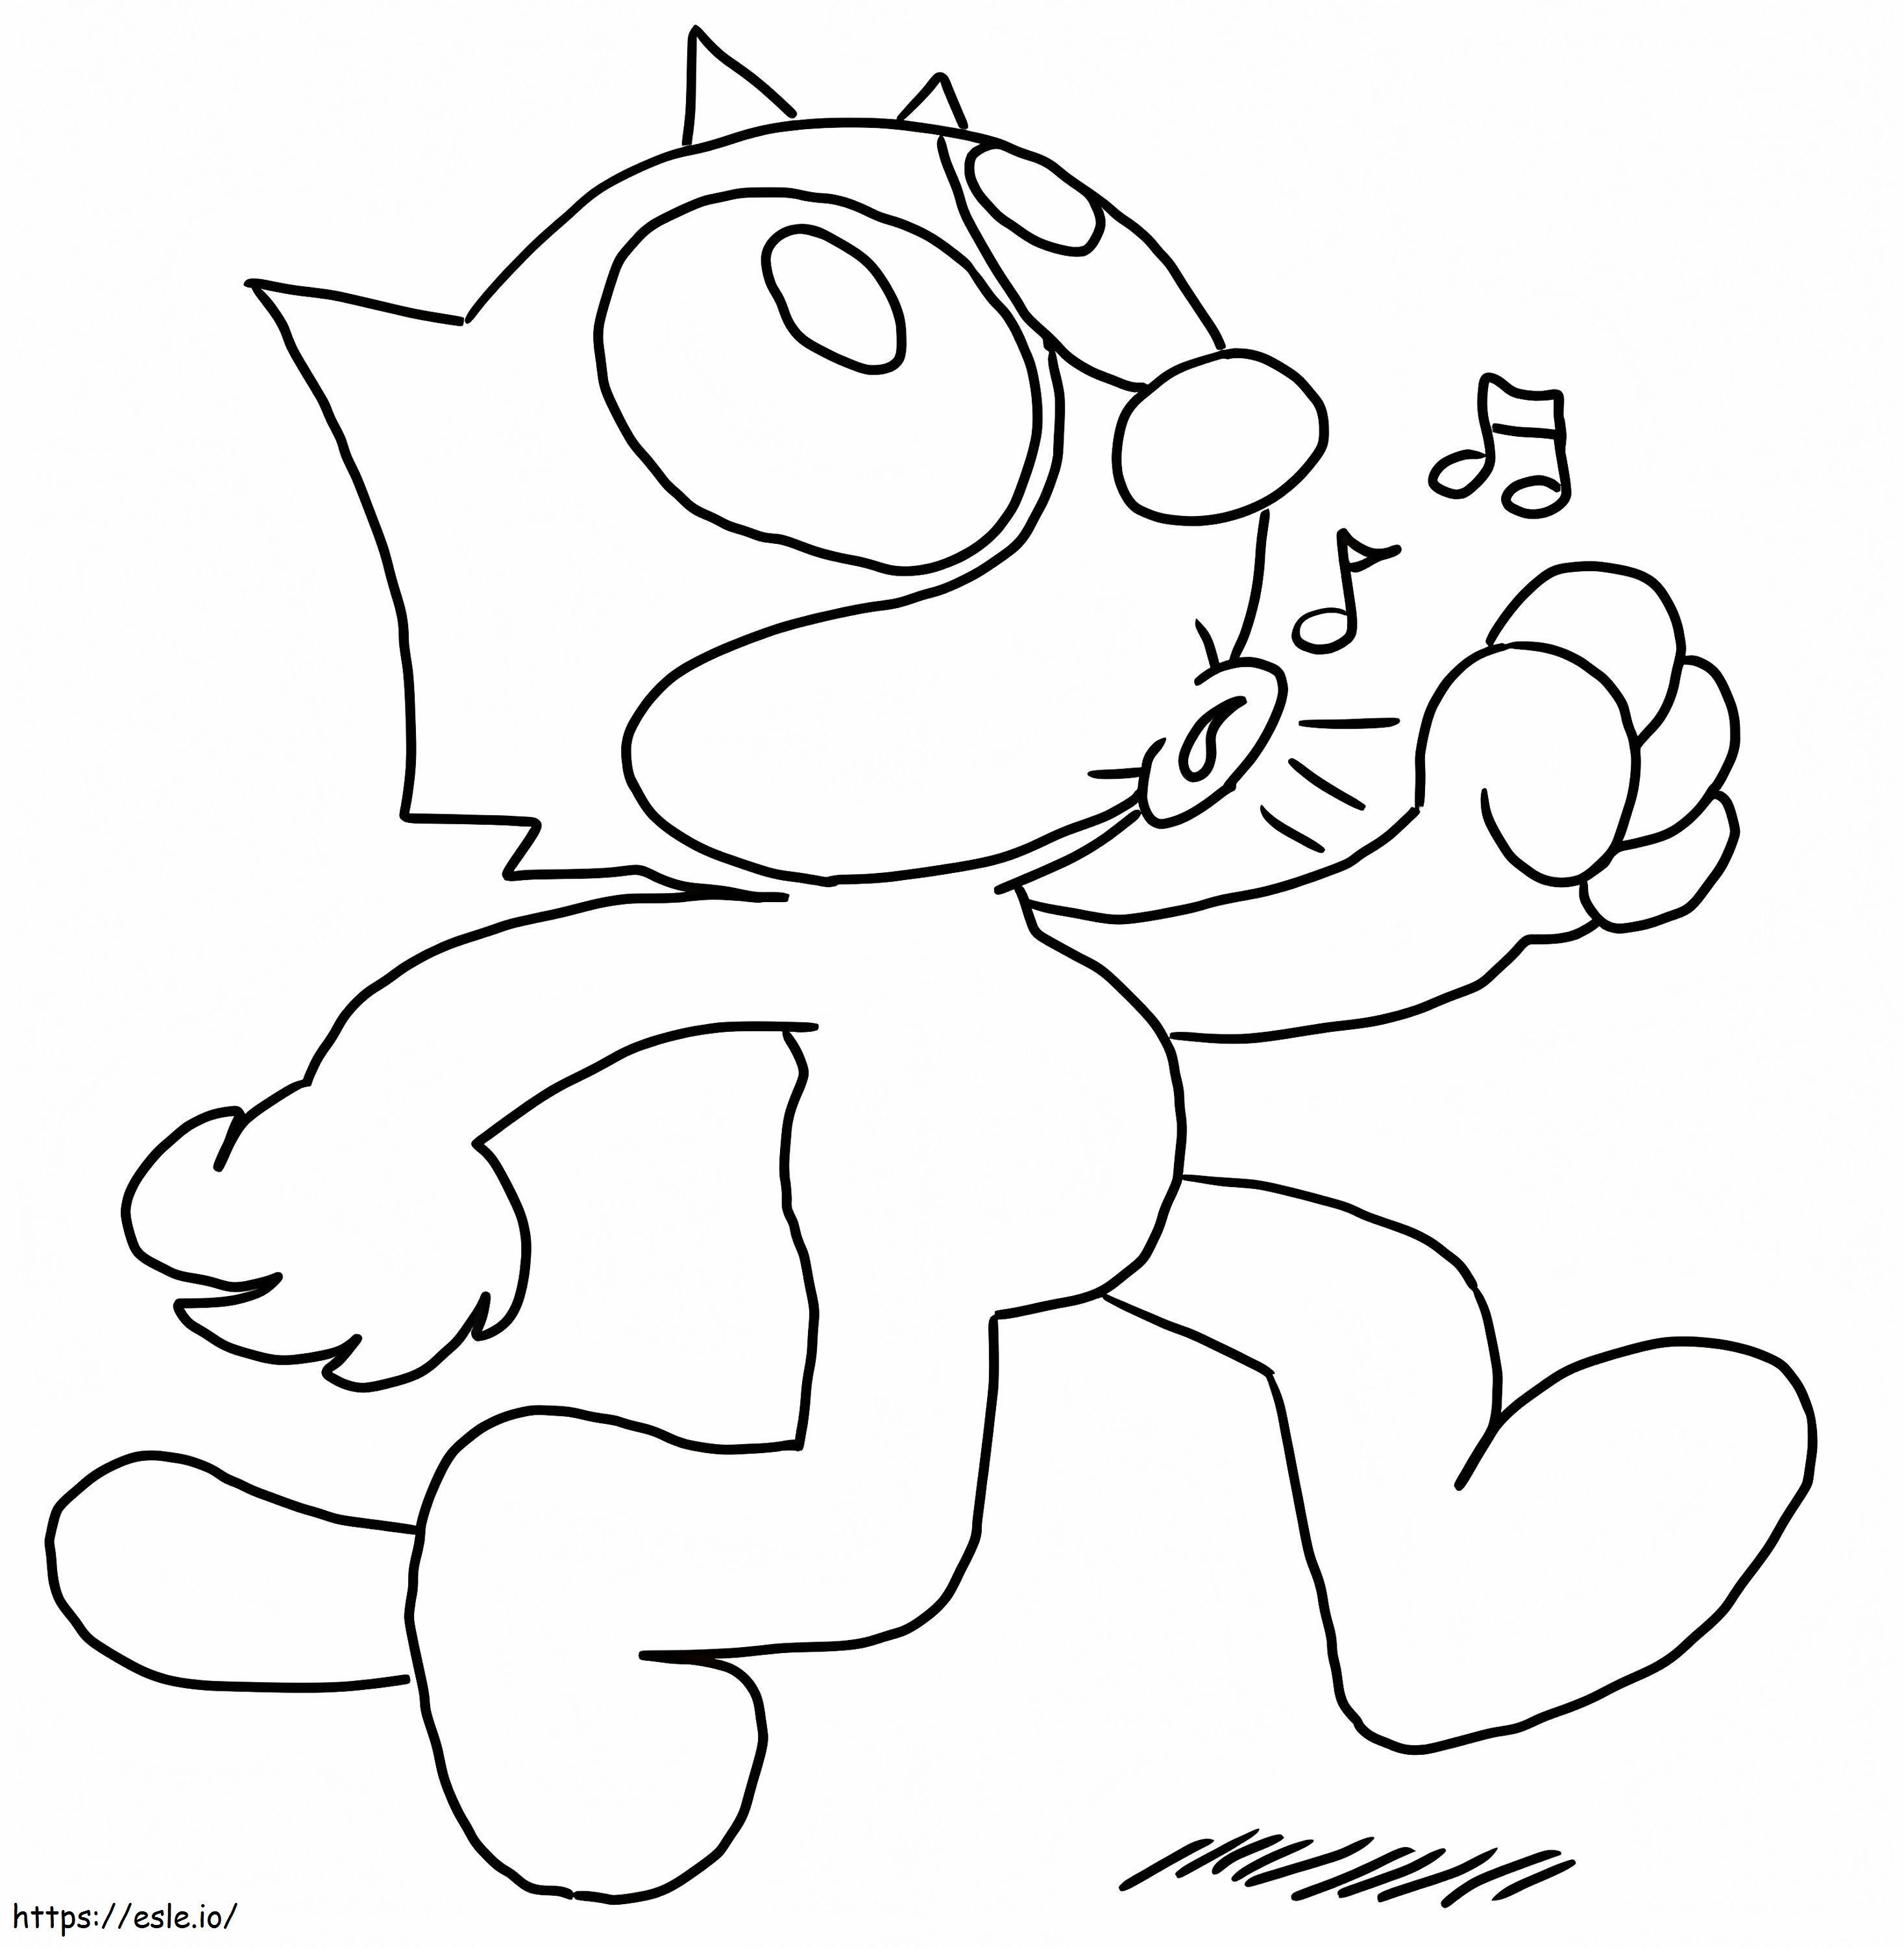 Felix The Cat Whistling coloring page